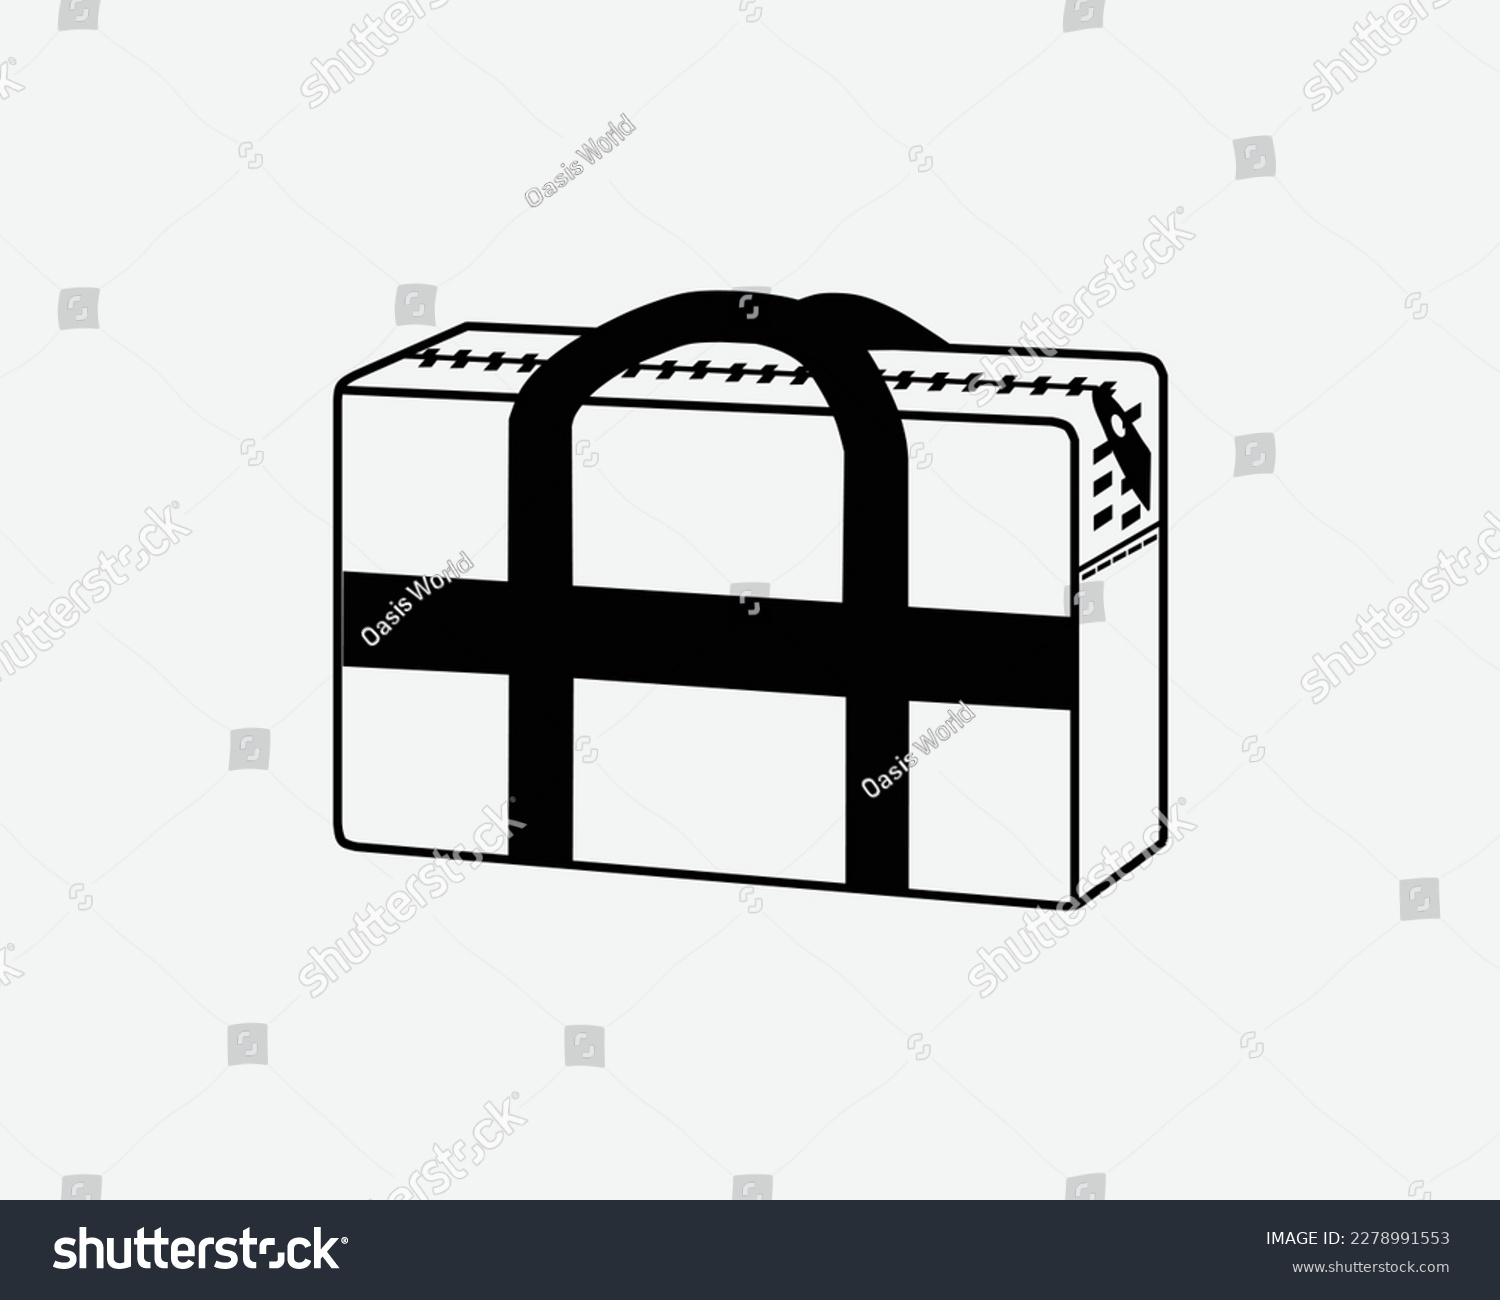 SVG of Handcarry Zipper Bag Hand Carry Briefcase Luggage Black White Silhouette Sign Symbol Icon Graphic Clipart Artwork Illustration Pictogram Vector svg